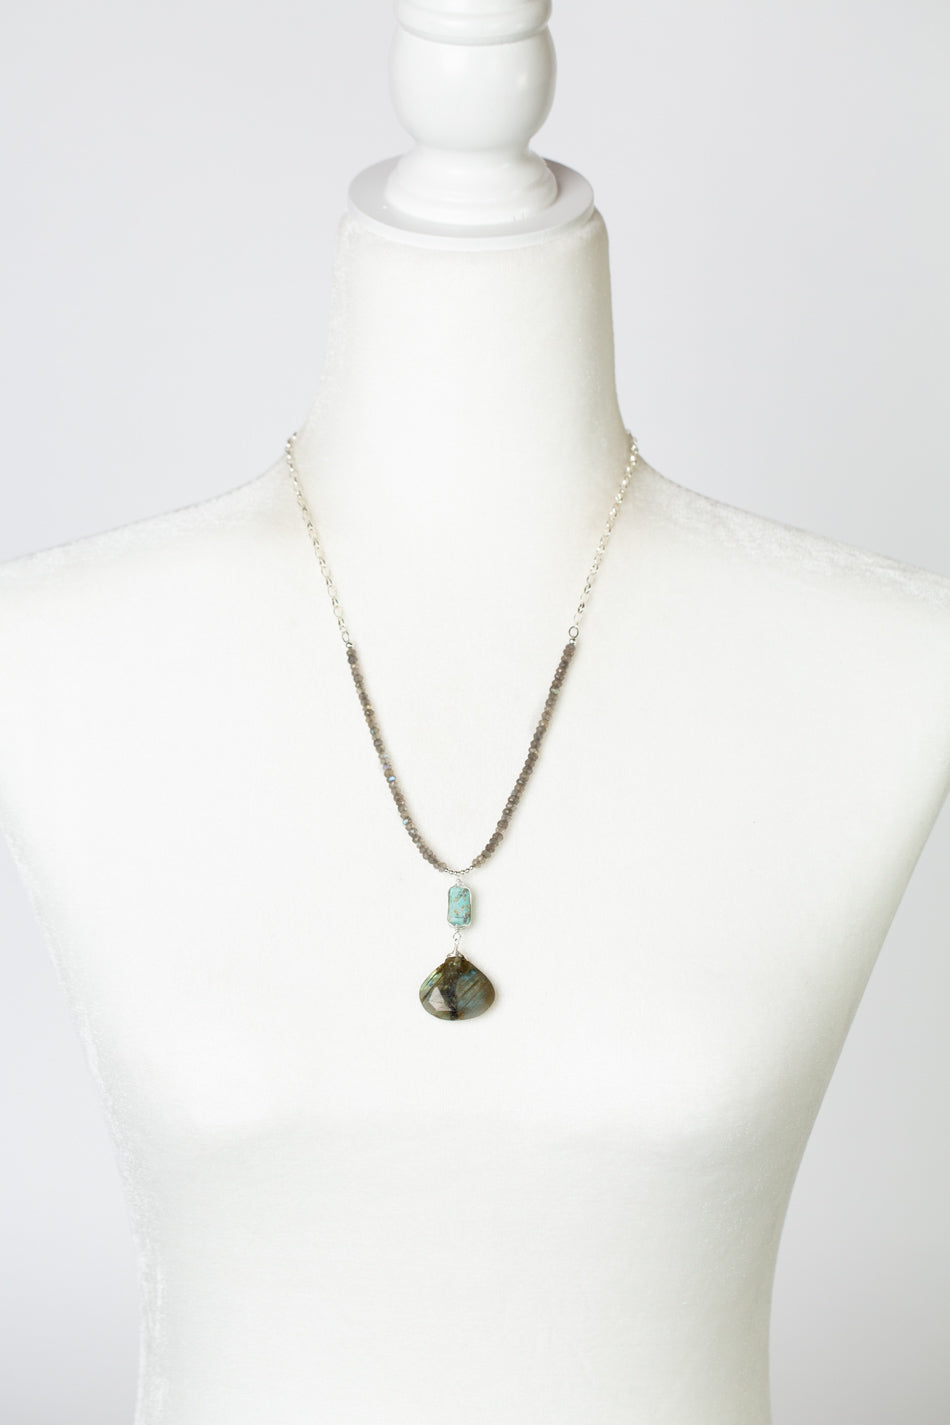 Mystic 20-22" Turquoise With Labradorite Statement Necklace